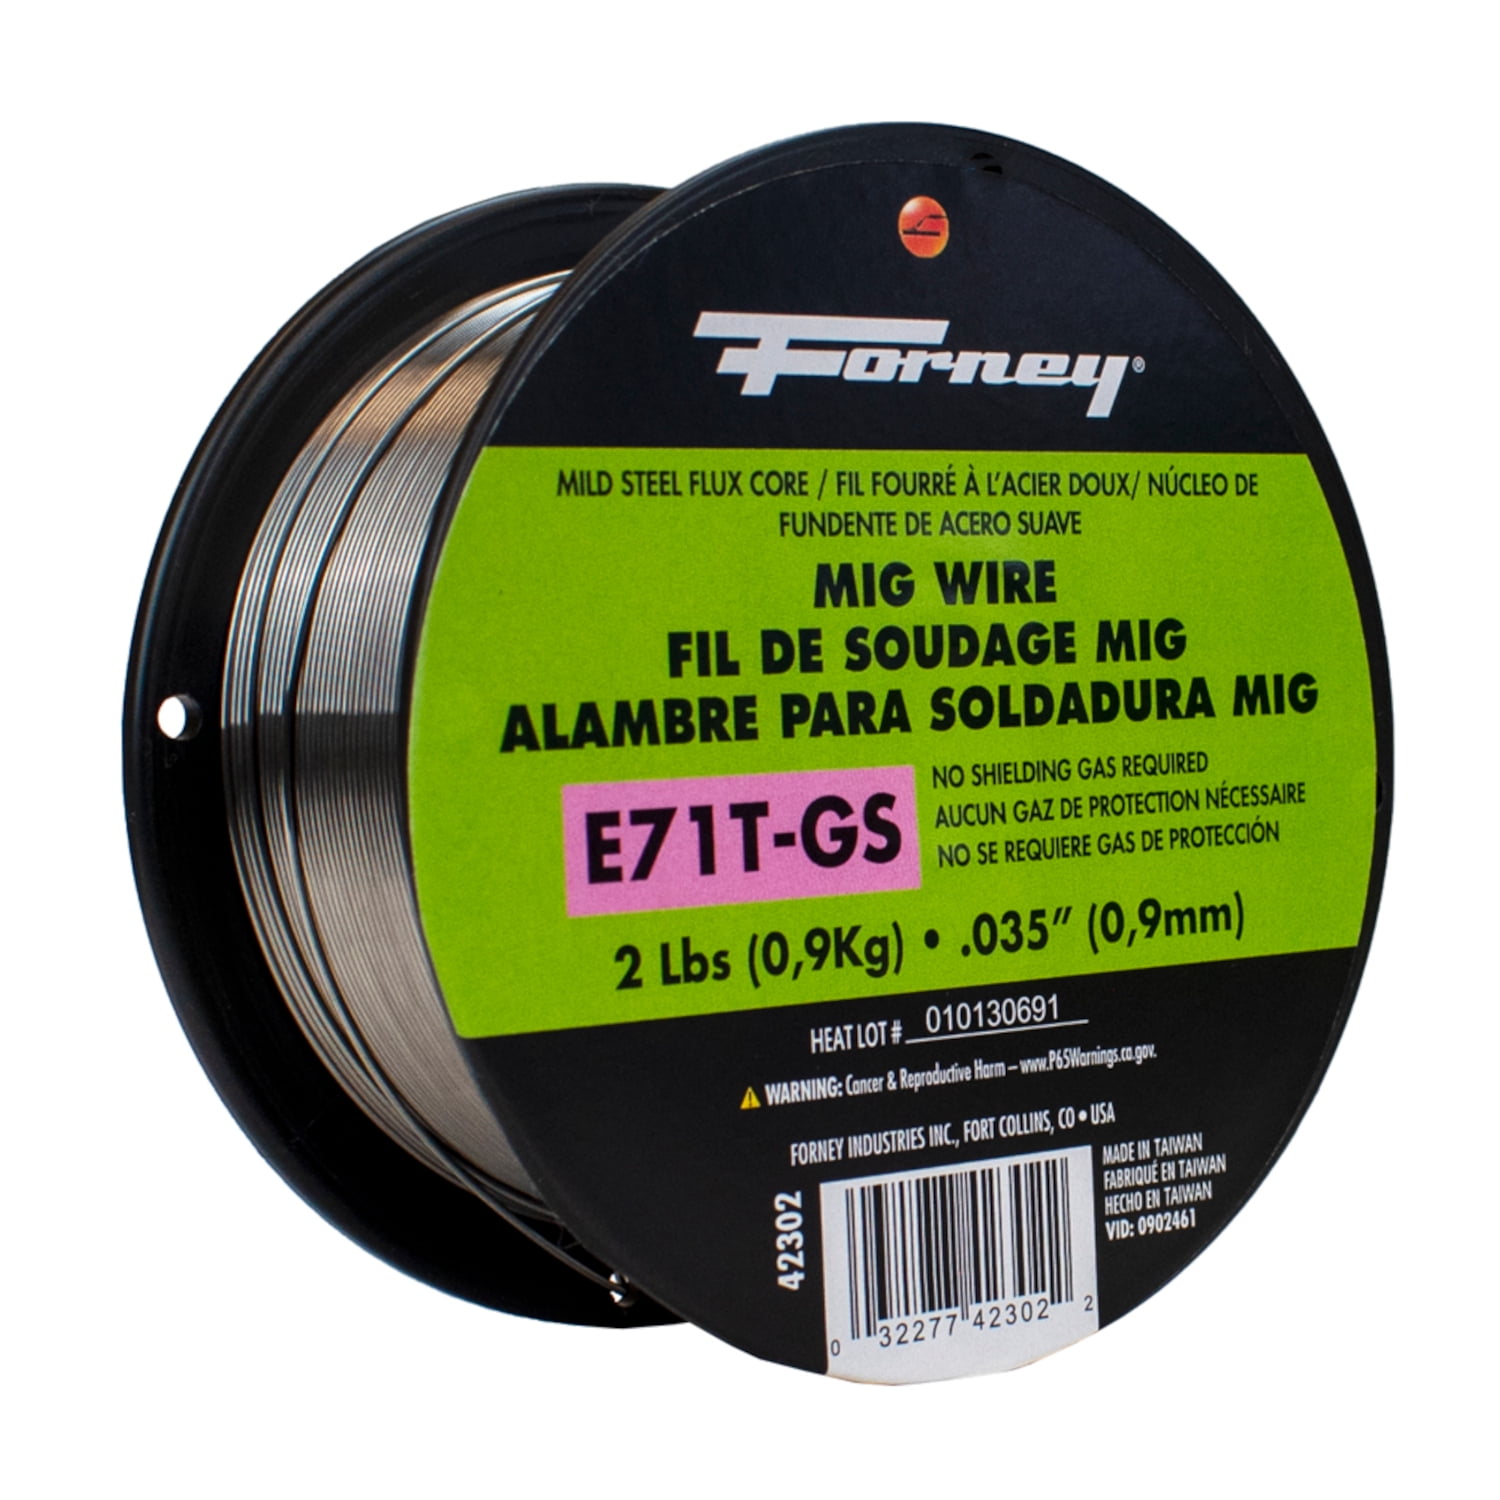 Harris 0001560 LFB BARE Welding Wire 1/8 x 36 lb.-50 lb Package The Harris Products Group Package 1/8 x 36 lb.-50 lb 